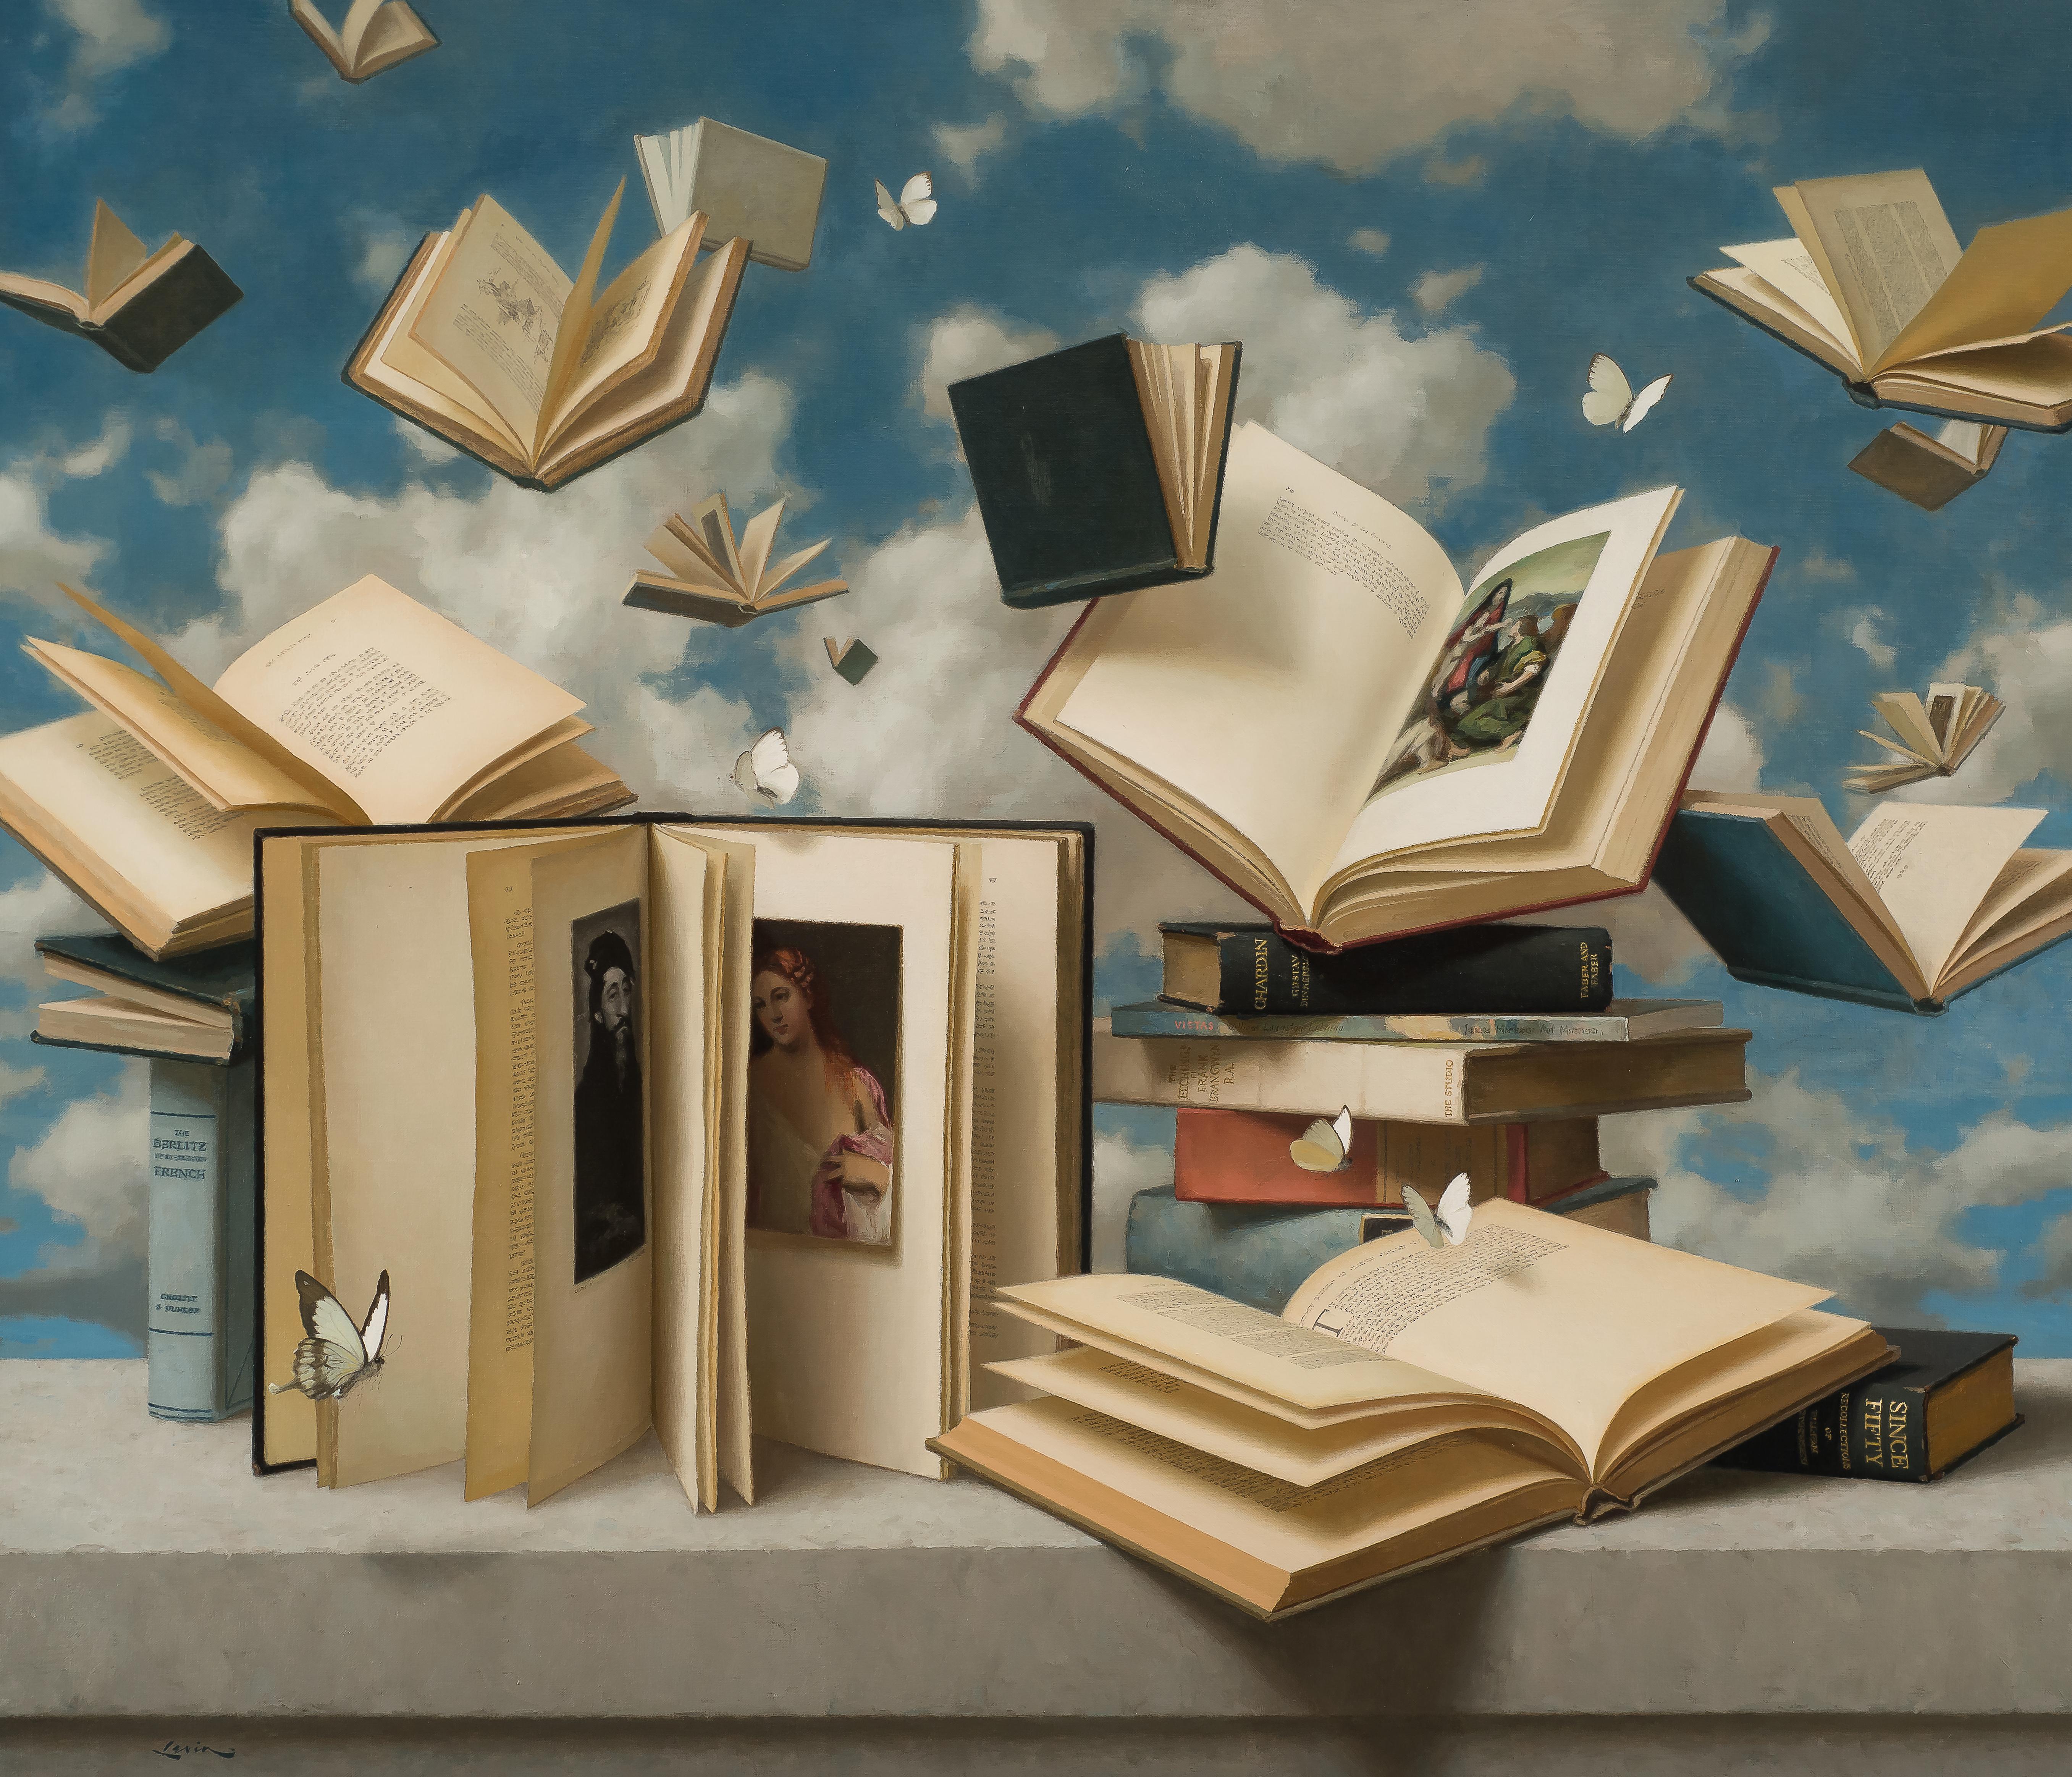 Floating Books and Butterflies - 2023 Surrealist still life and skyscape